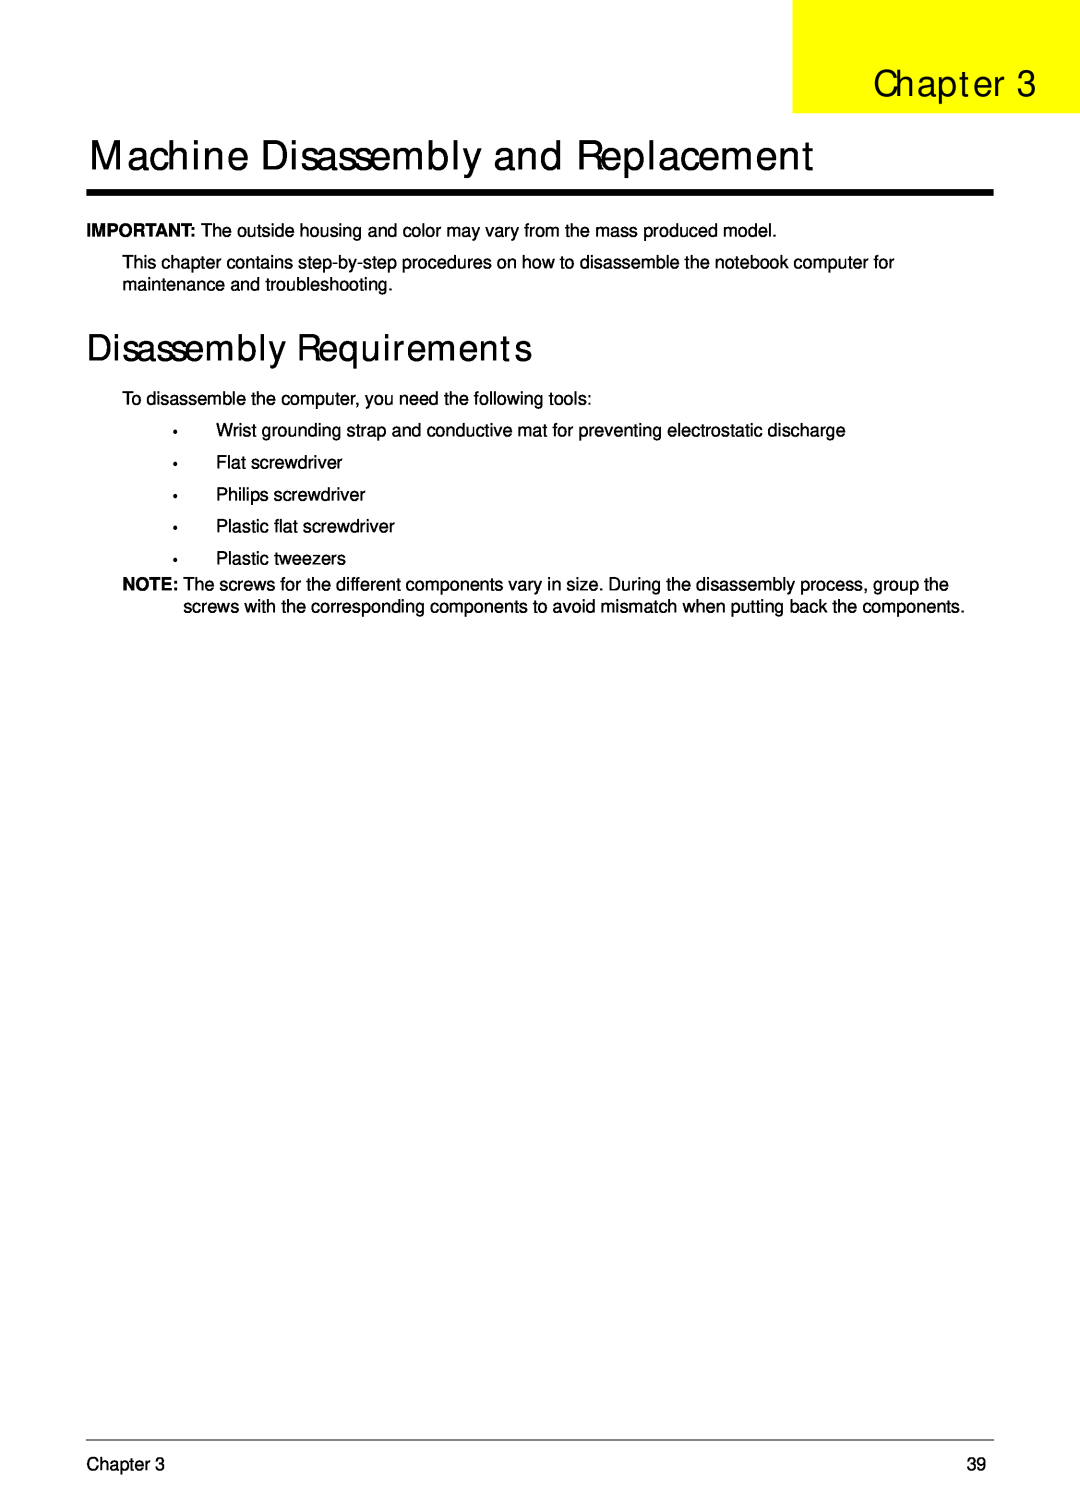 Acer 5532 manual Machine Disassembly and Replacement, Disassembly Requirements, Chapter 